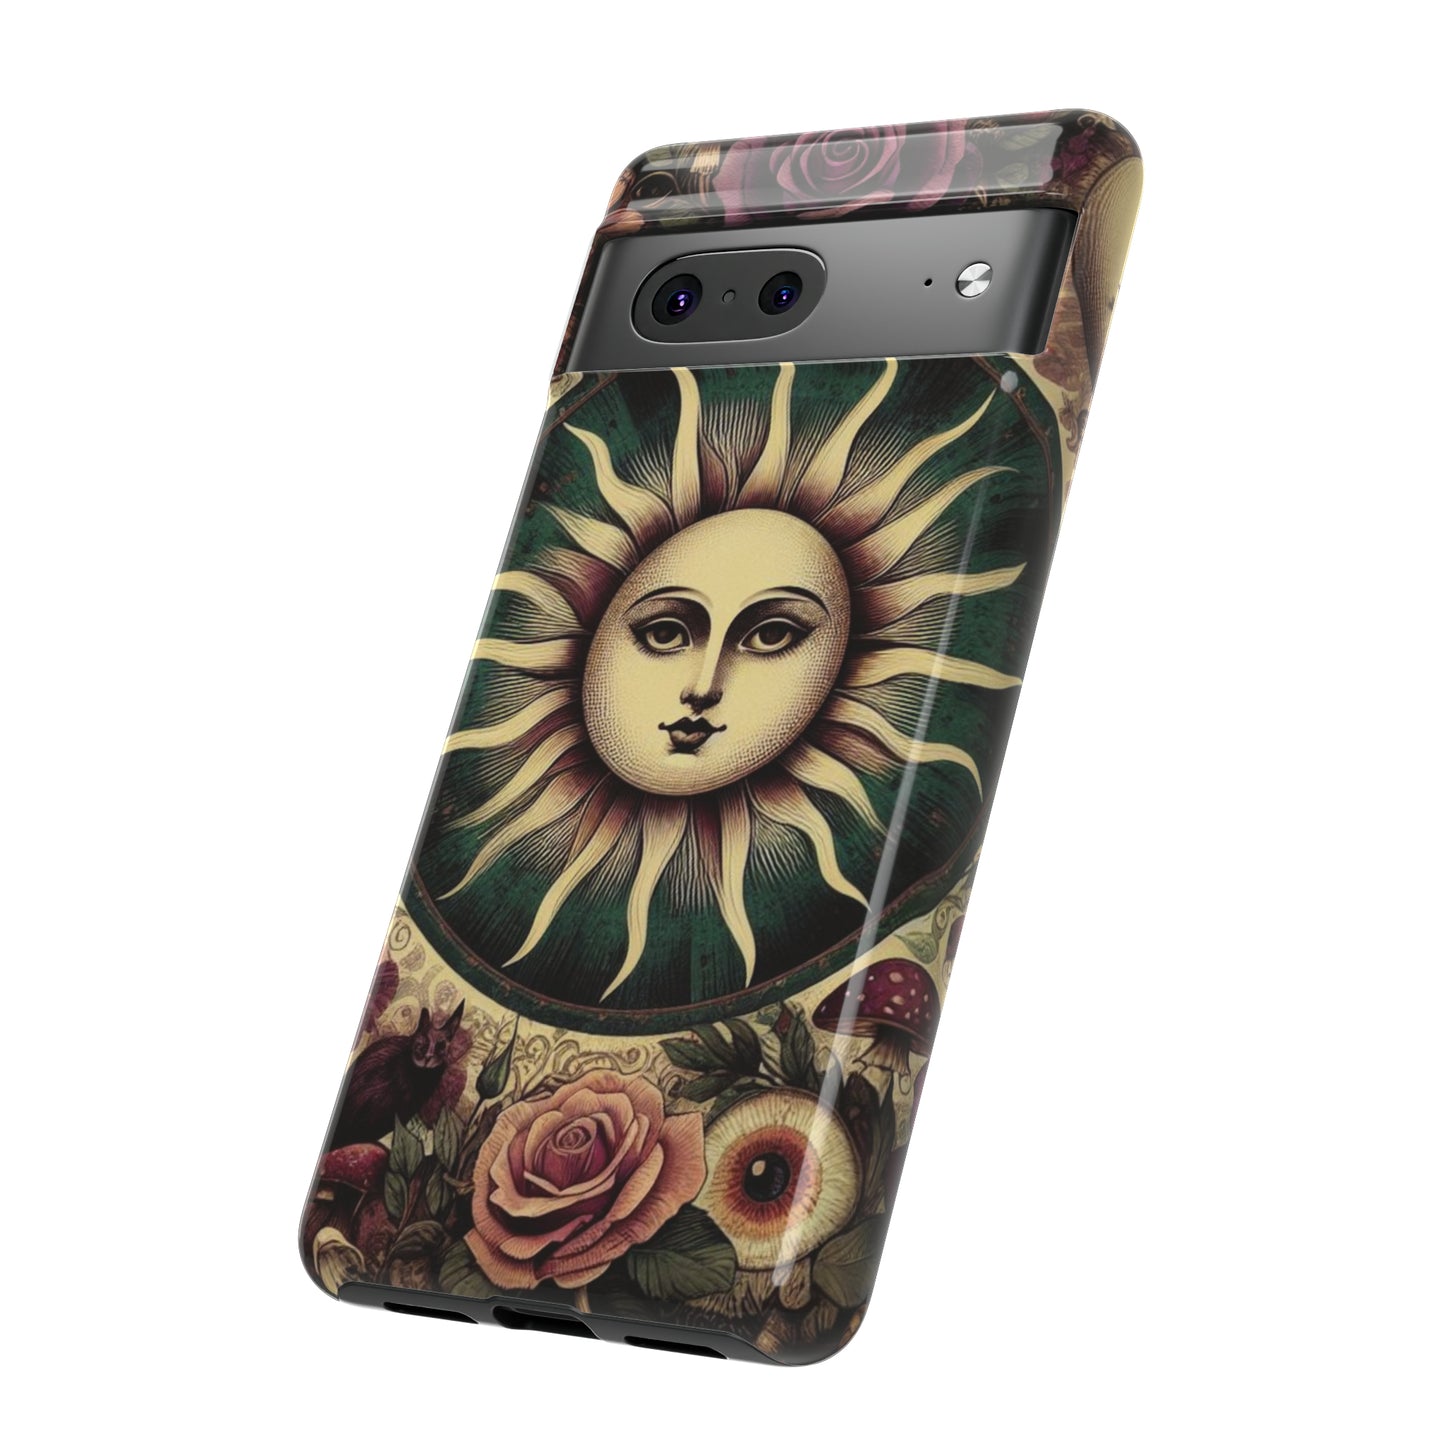 Tough Cases, Samsung Galaxy, Apple iPhone, Google Pixel, Whimsigoth Aestetic, Android Phone Case, Celestial Design